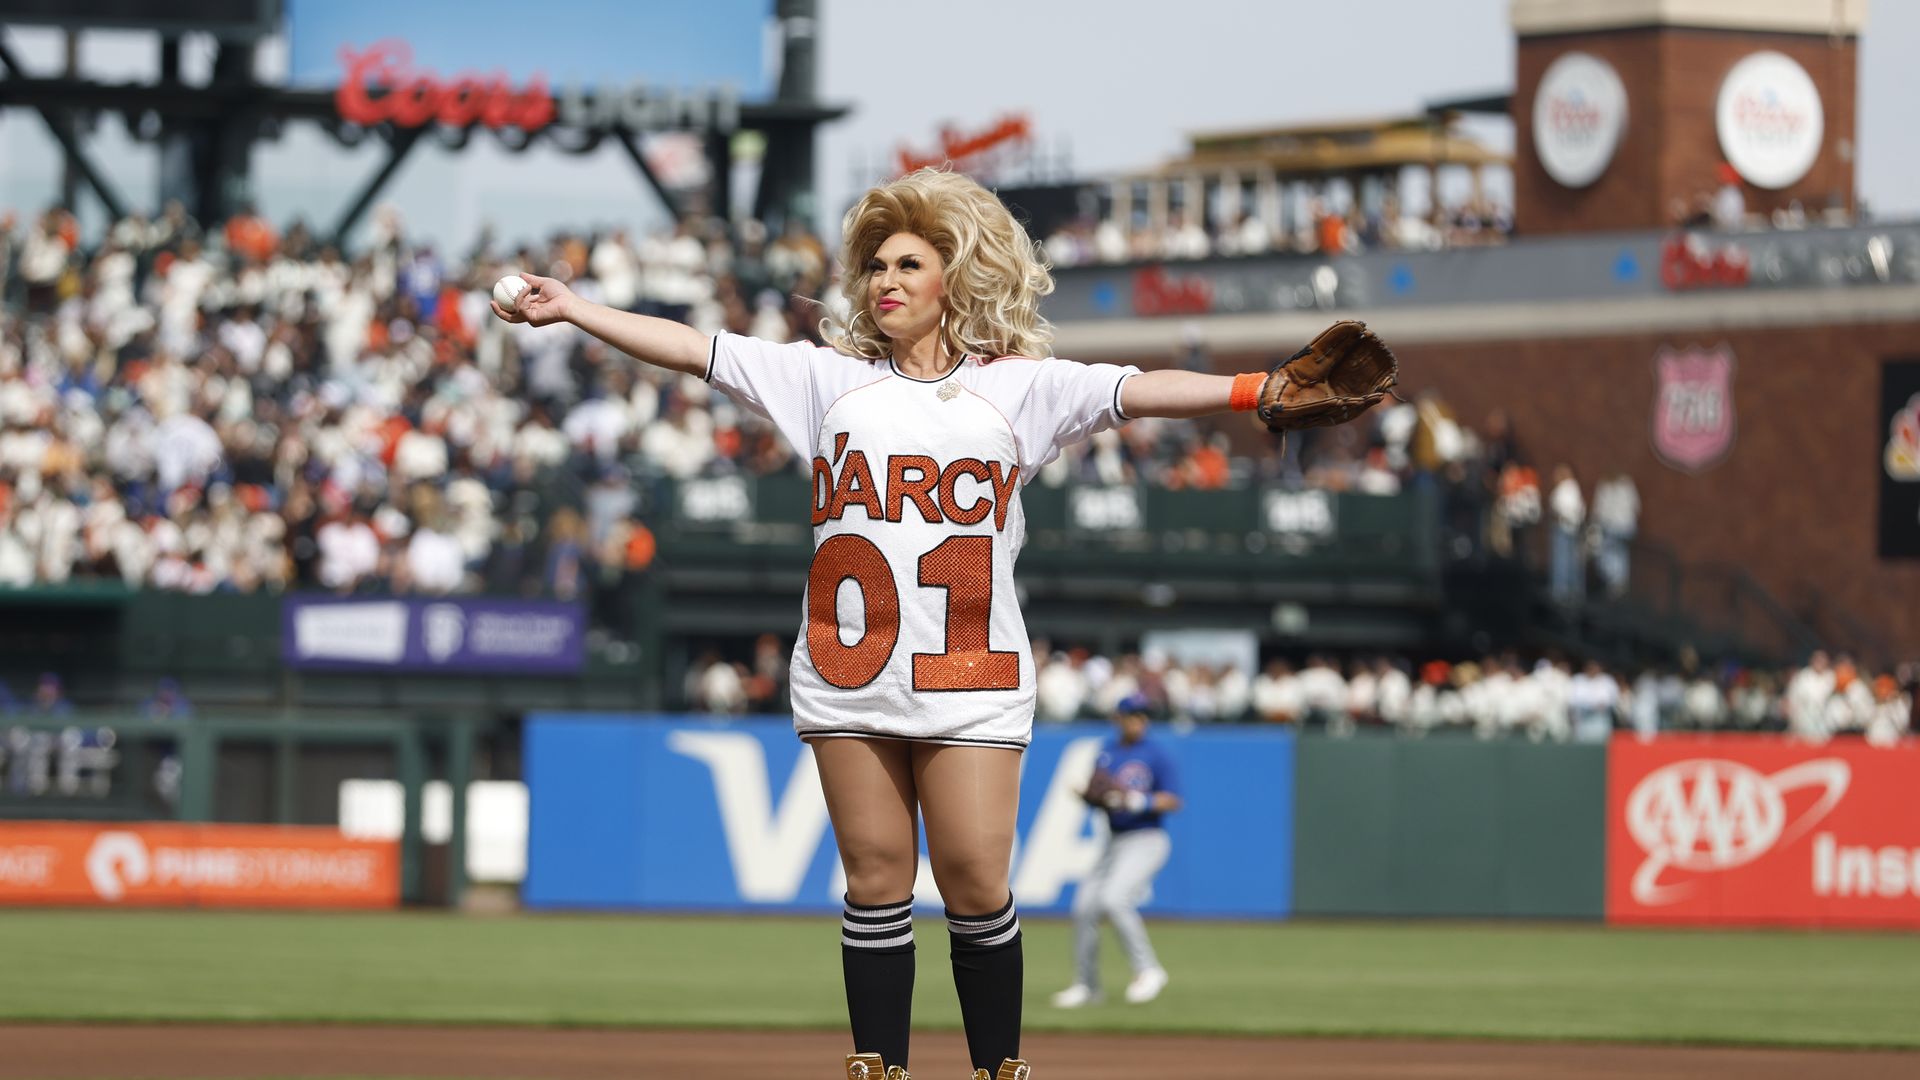 Photo of D'Arcy Drollinger holding her arms out as she prepares to pitch at a Giants game